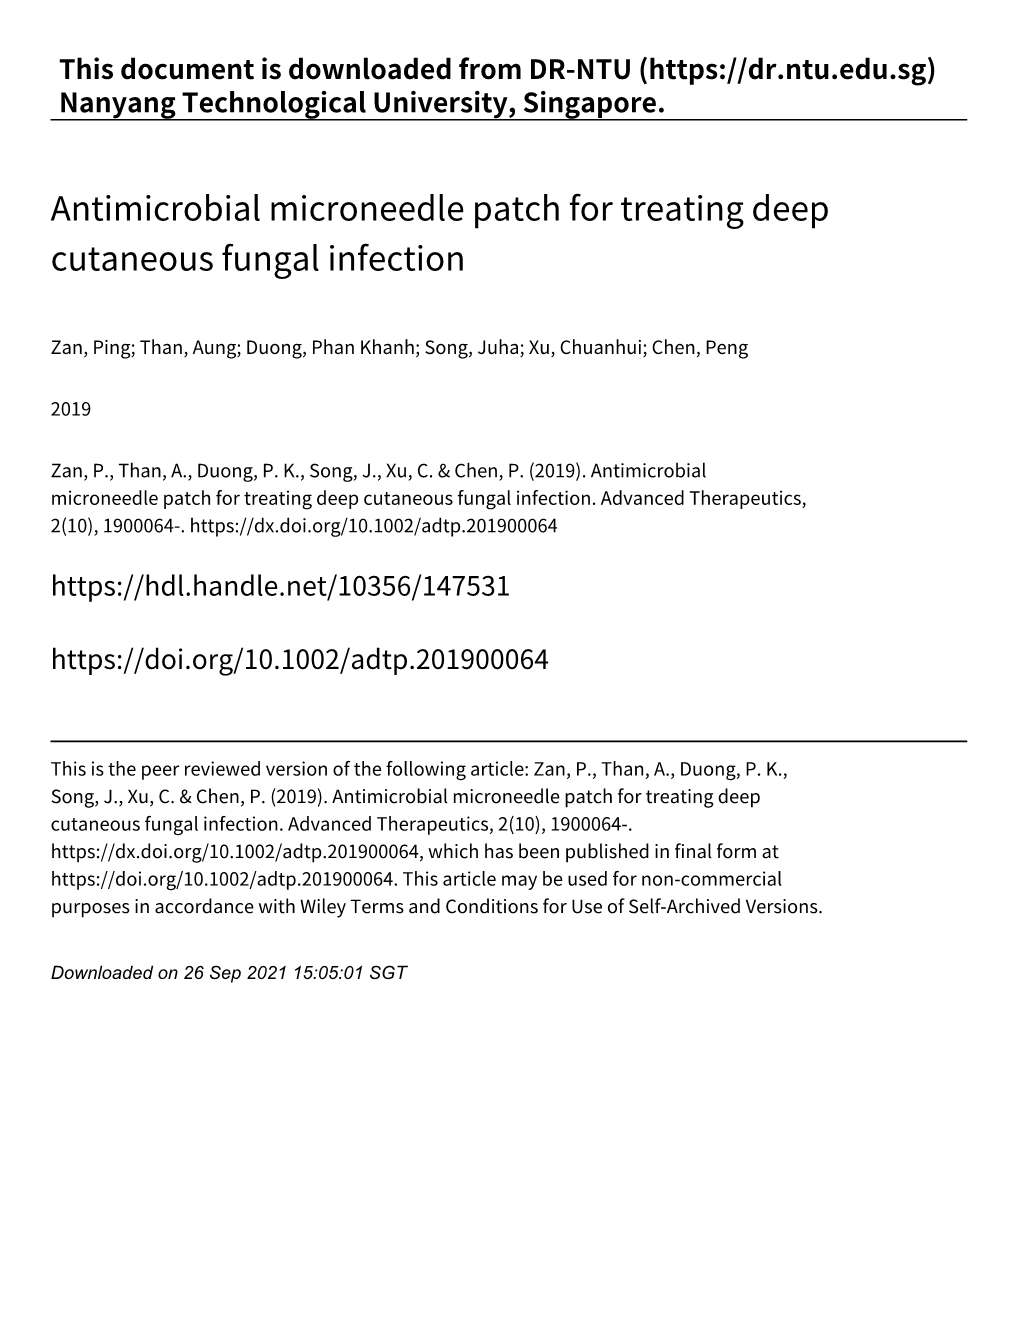 Antimicrobial Microneedle Patch for Treating Deep Cutaneous Fungal Infection